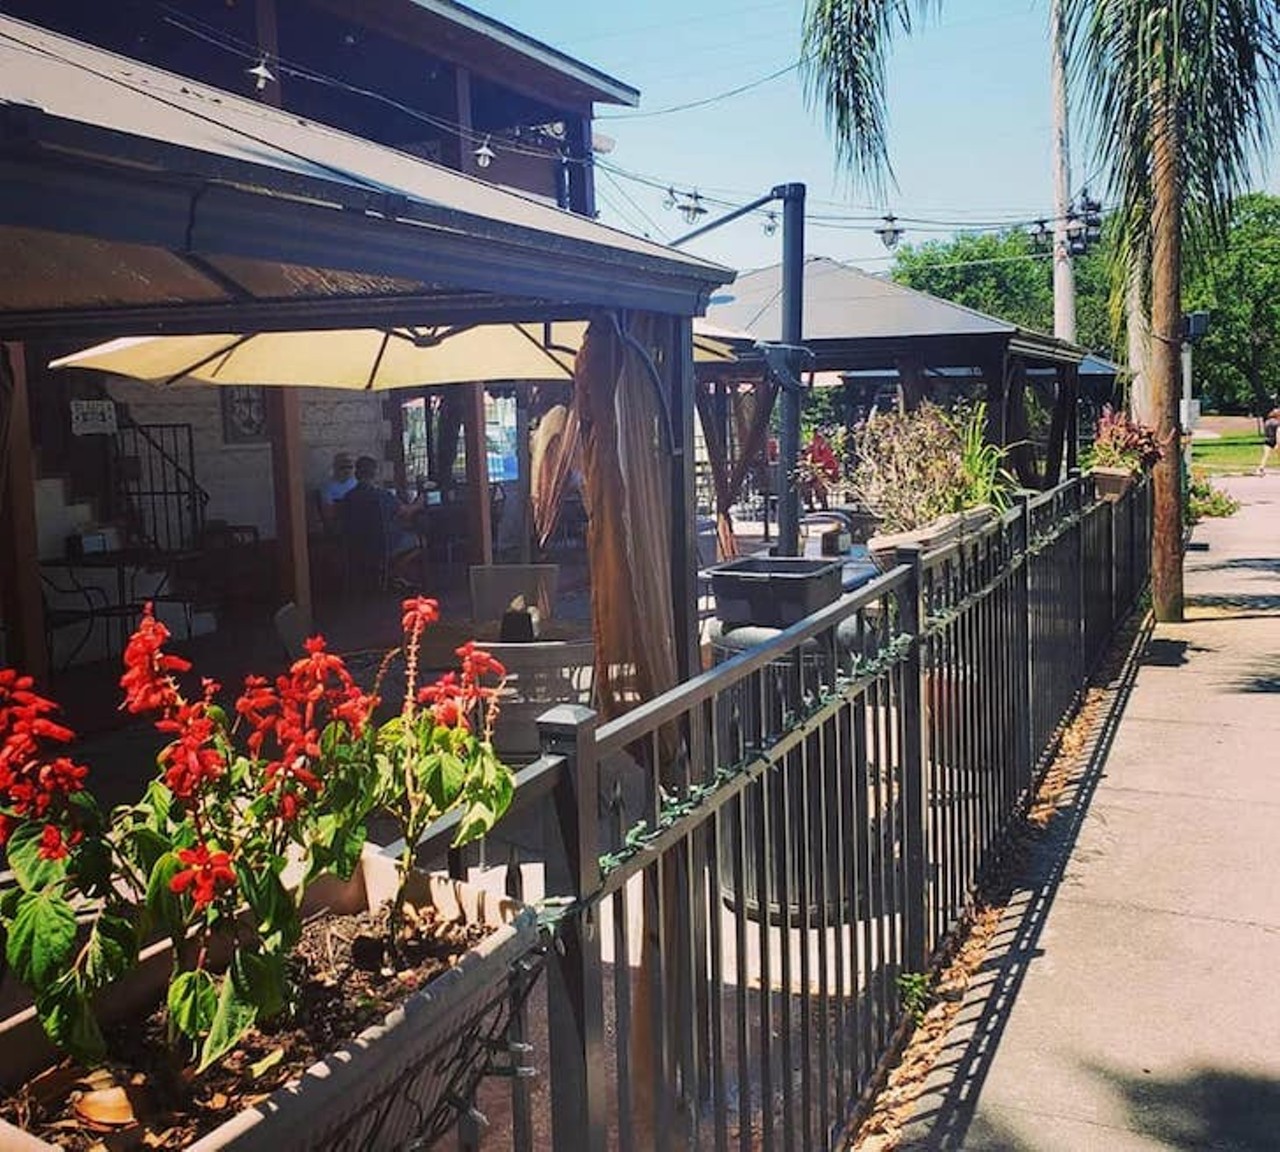 903 Mills Market 
903 S. Mills Ave., 407-898-4392
The patio area is now open for outdoor dining with tables spaced six feet apart, with to-go dining options and daily specials still going strong. 
Photo via 903 Mills Market/Facebook